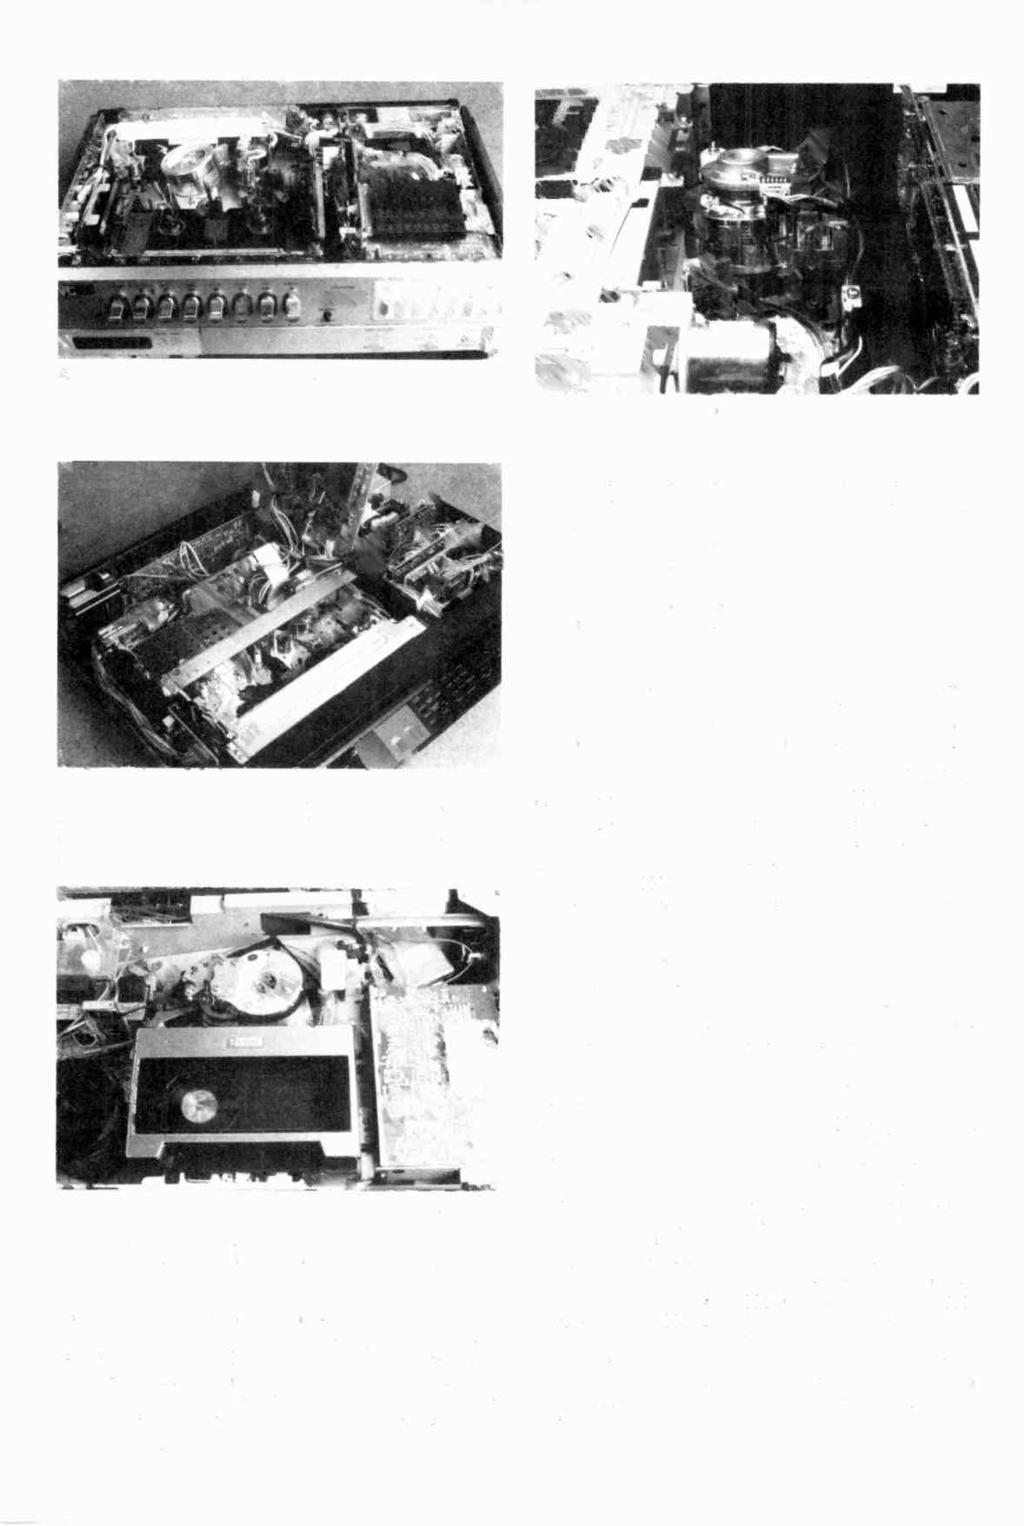 A 1978 interior - the JVC HR3300 with its top cover removed. The machine weighed 13-9kg and its one -event timer had no setting, the recording continuing until the end of the tape was reached.